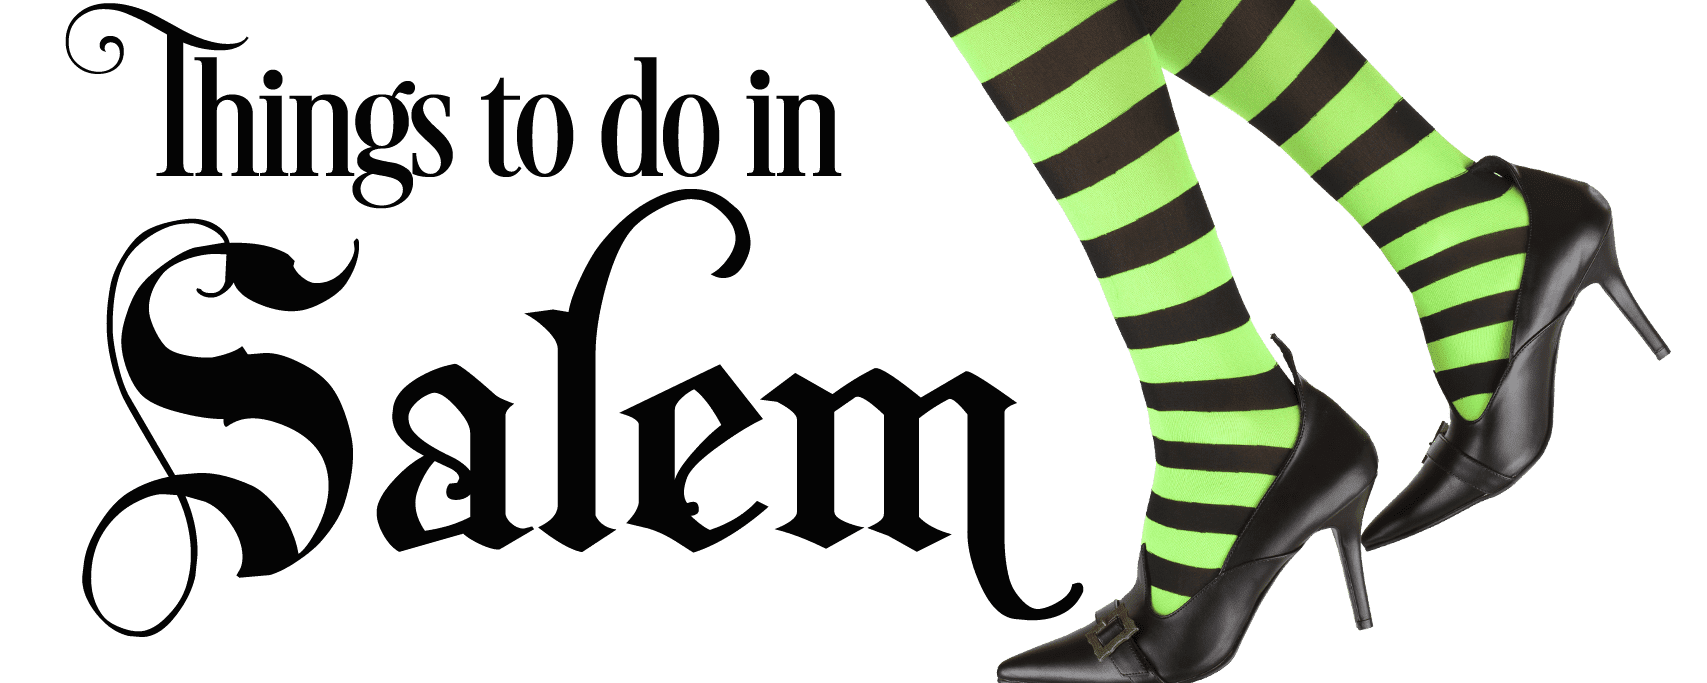 Things To Do In Salem